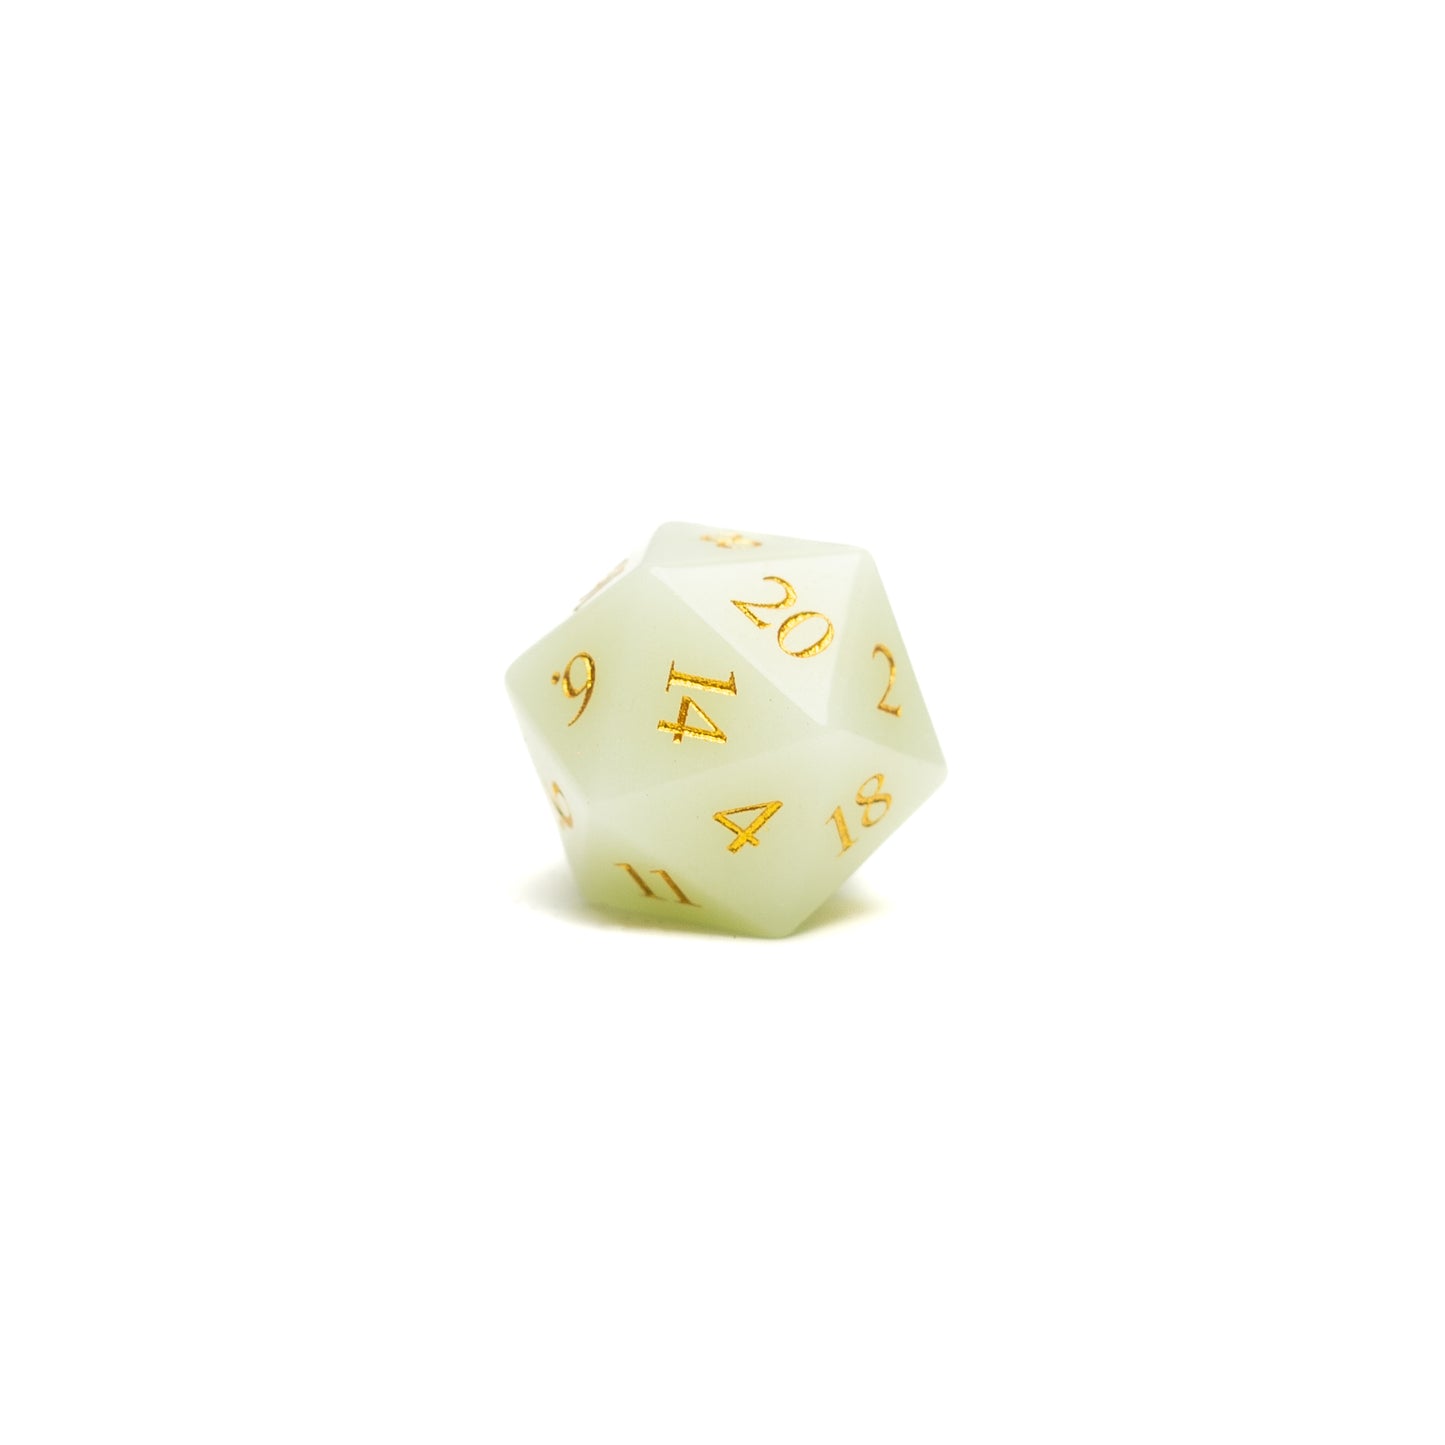 Roll Britannia Glow in the Dark Gemstone Dungeons and Dragons D20 Dice